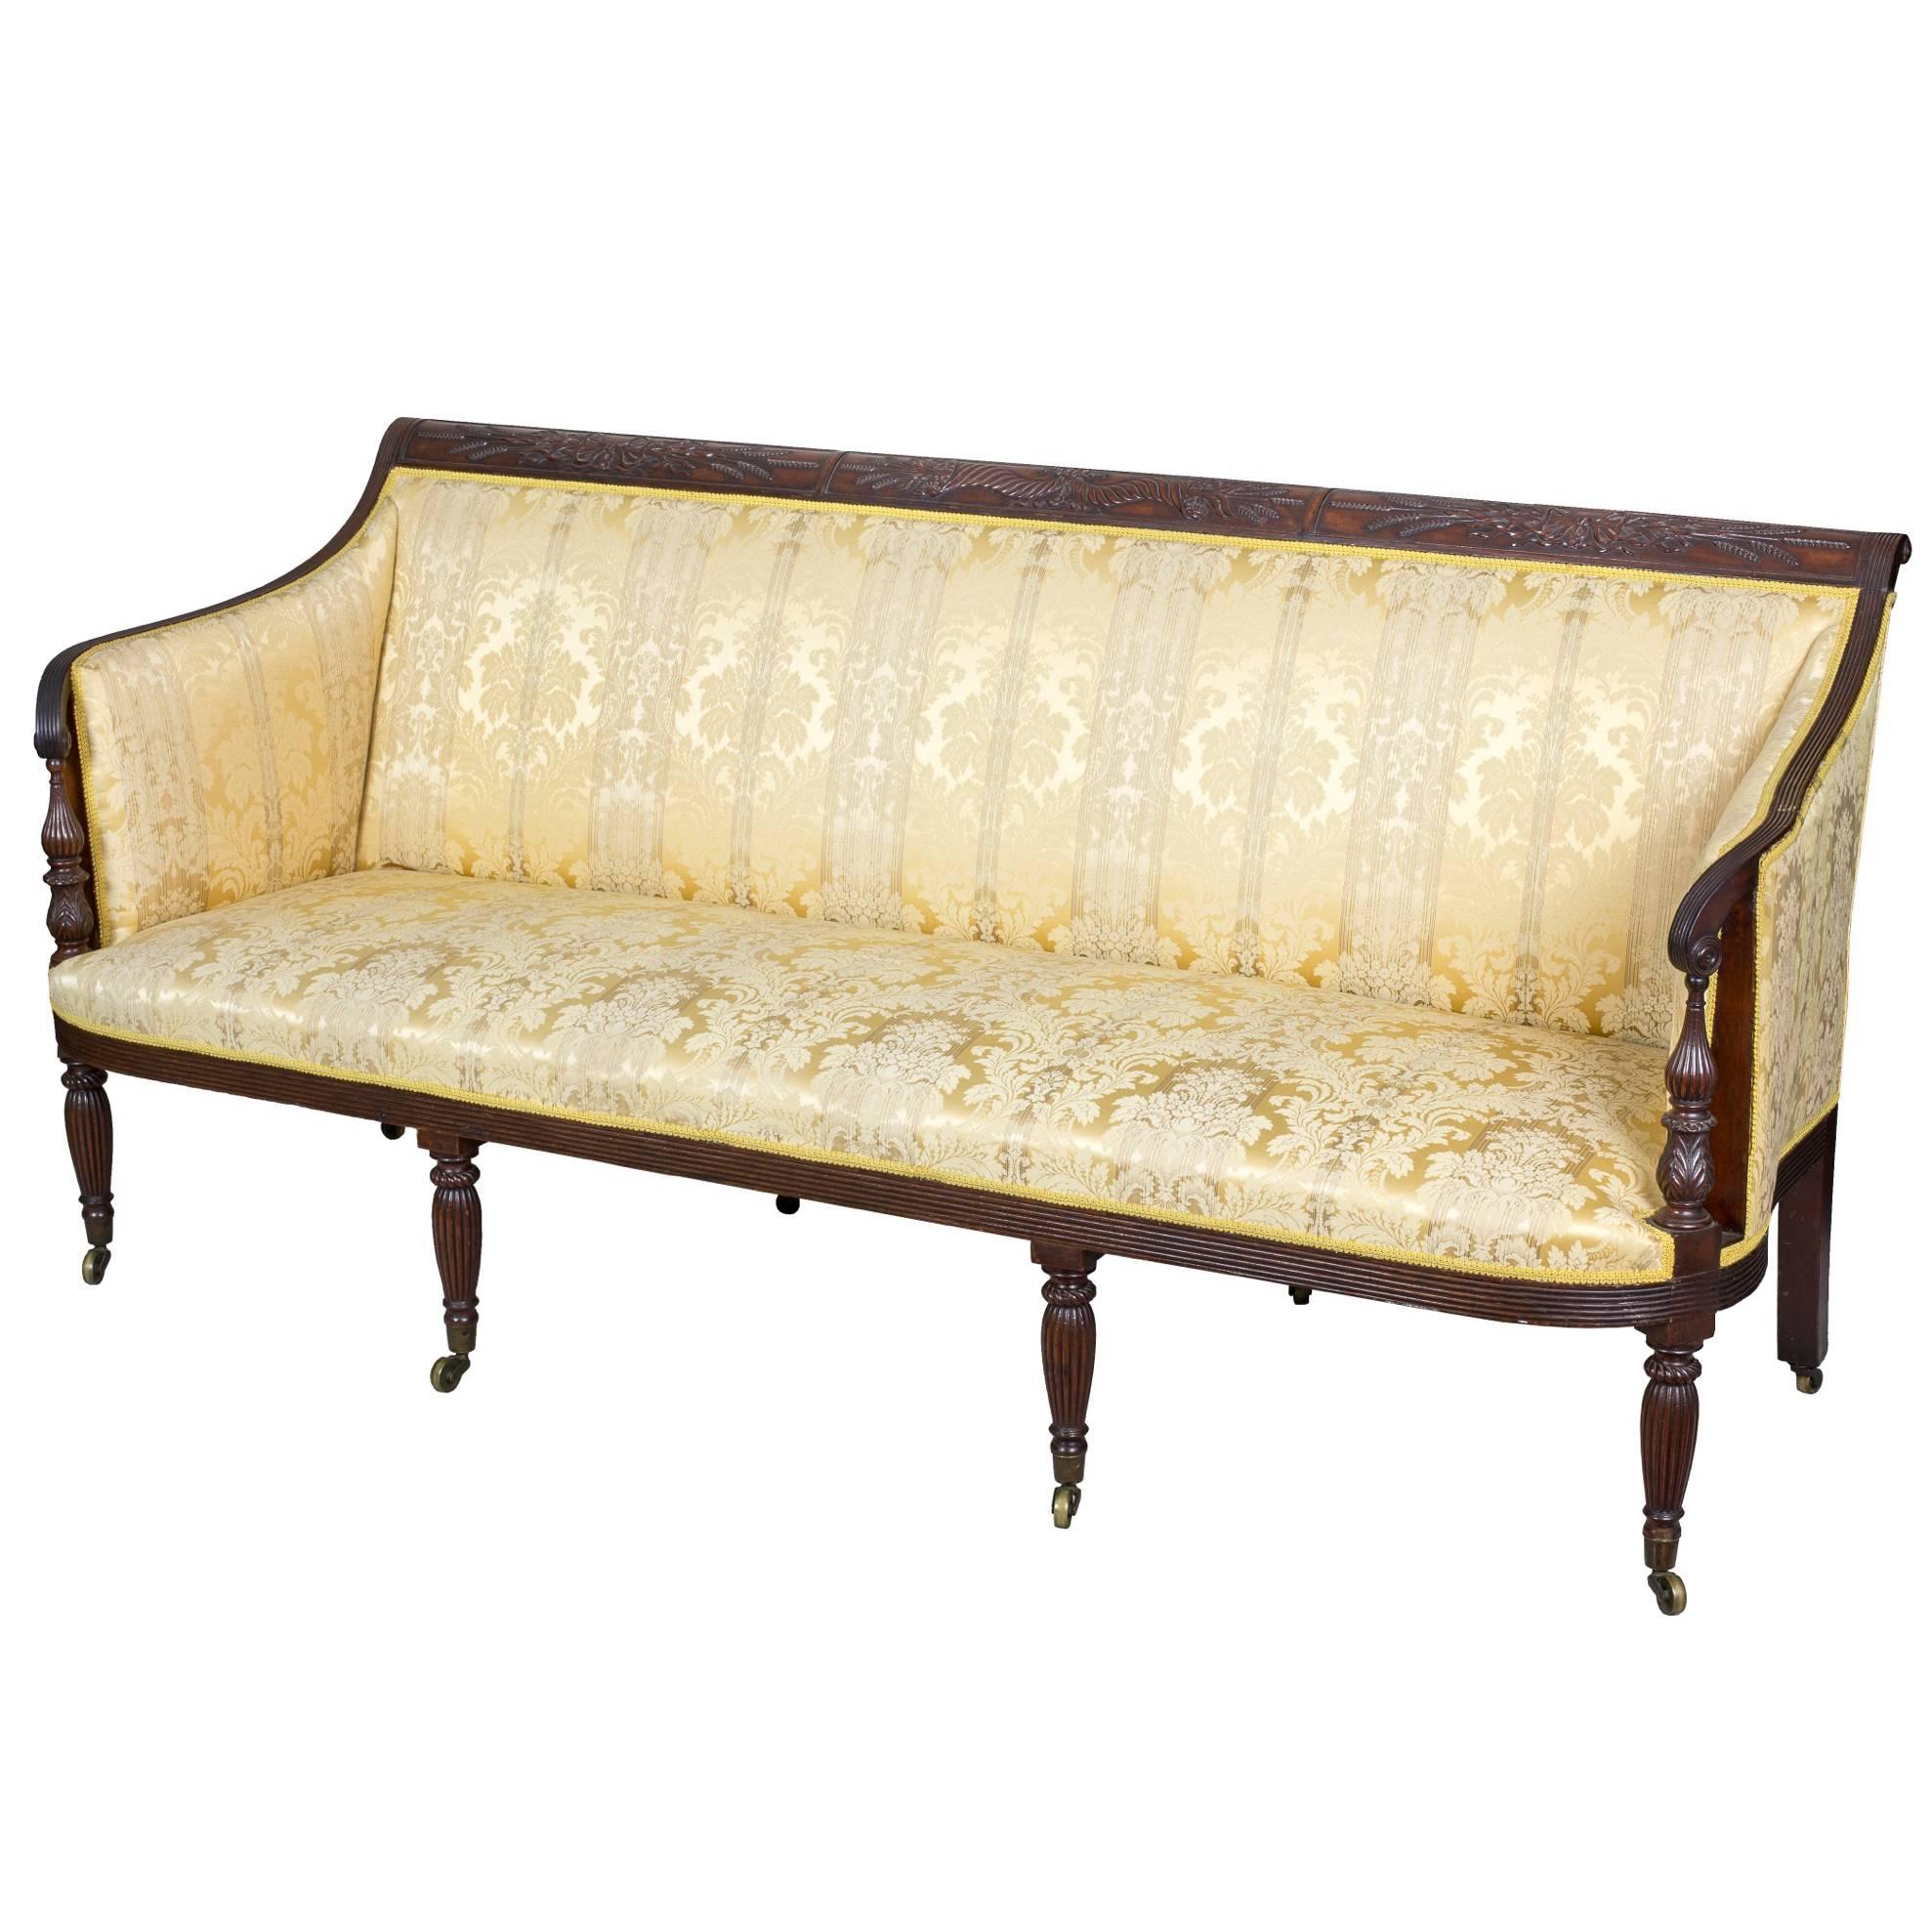 Mahogany Classical Sofa with Turned in Arms, Duncan Phyfe, New York, circa 1810 For Sale